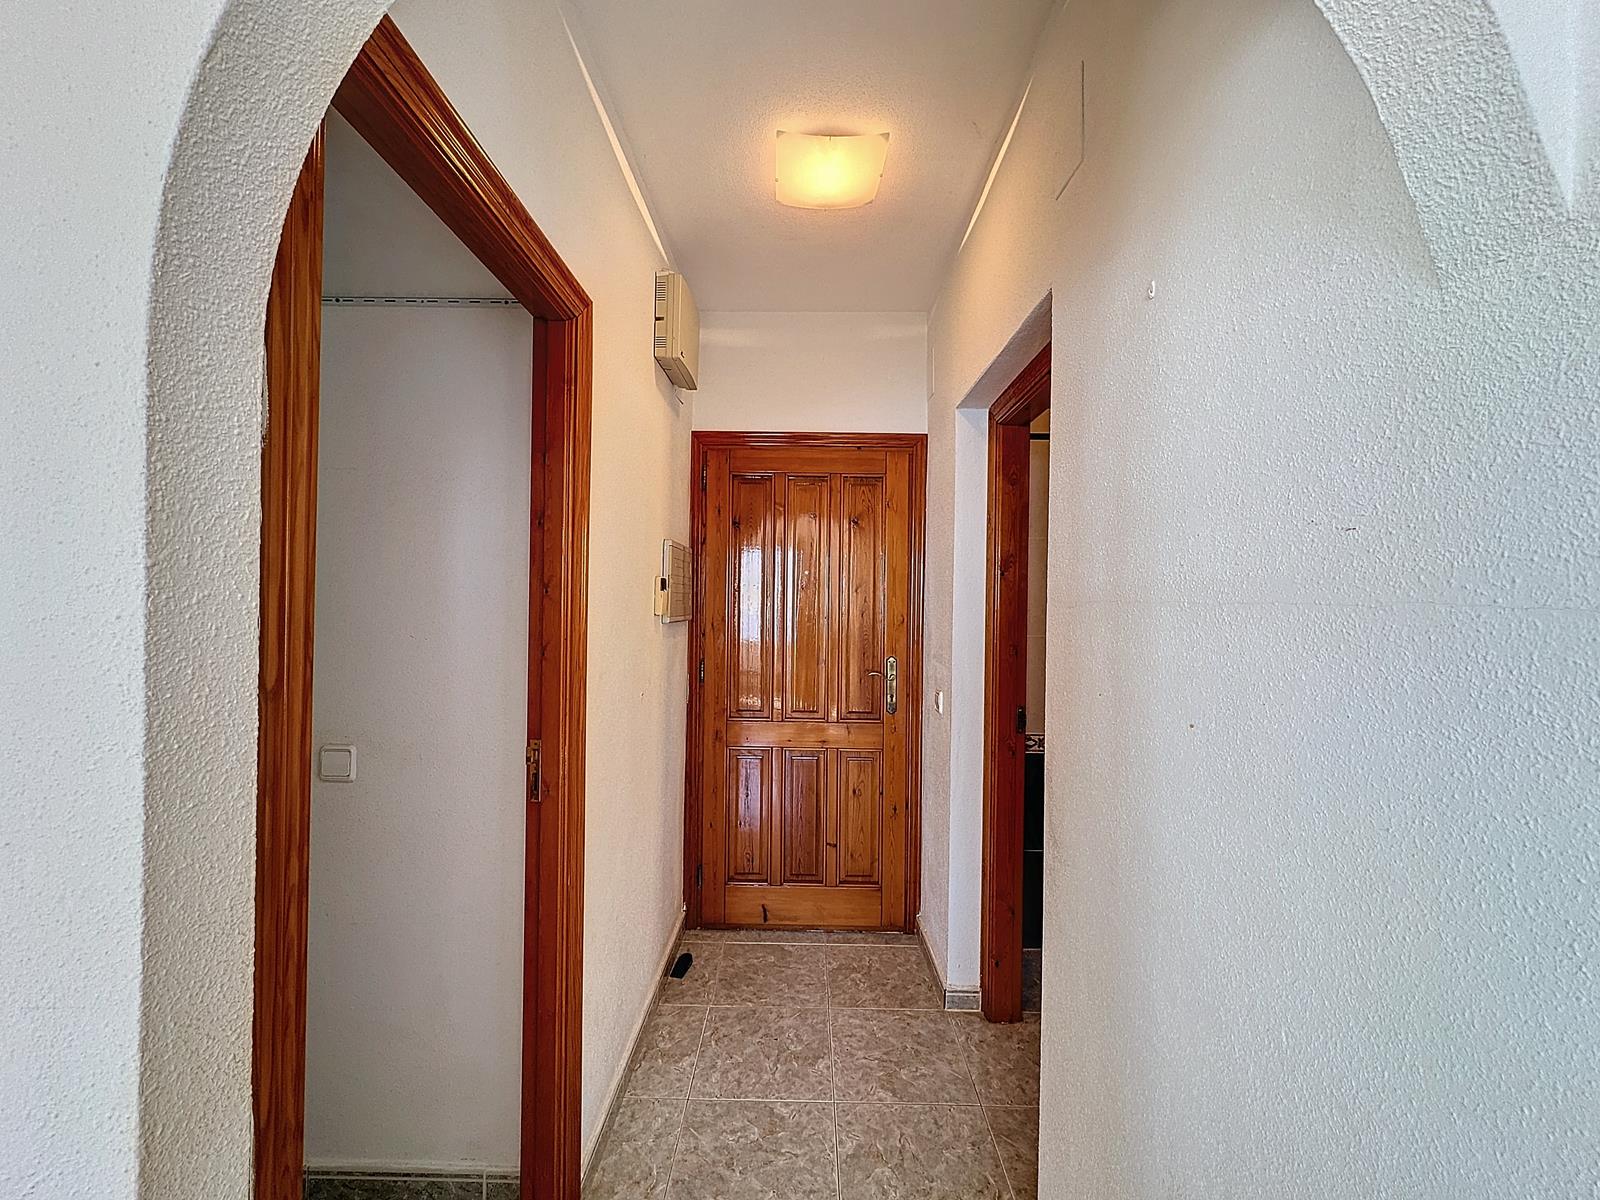 For Sale. Apartment in Benitachell